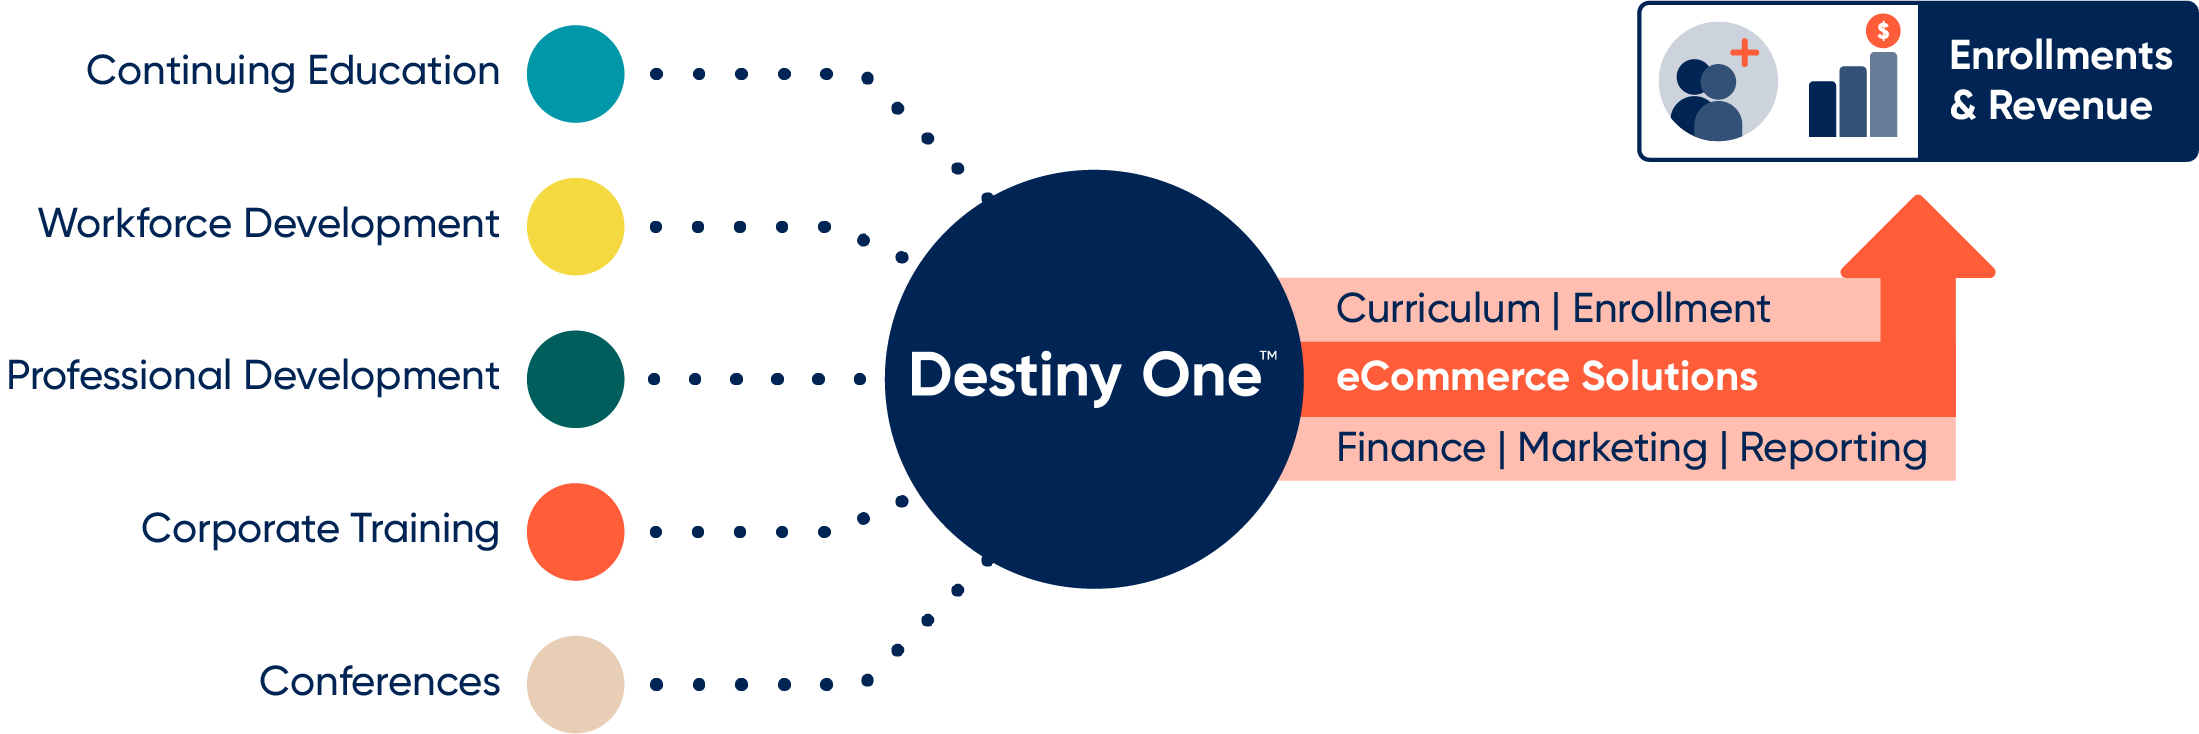 Modern Campus Destiny One delivers eCommerce Excellence.